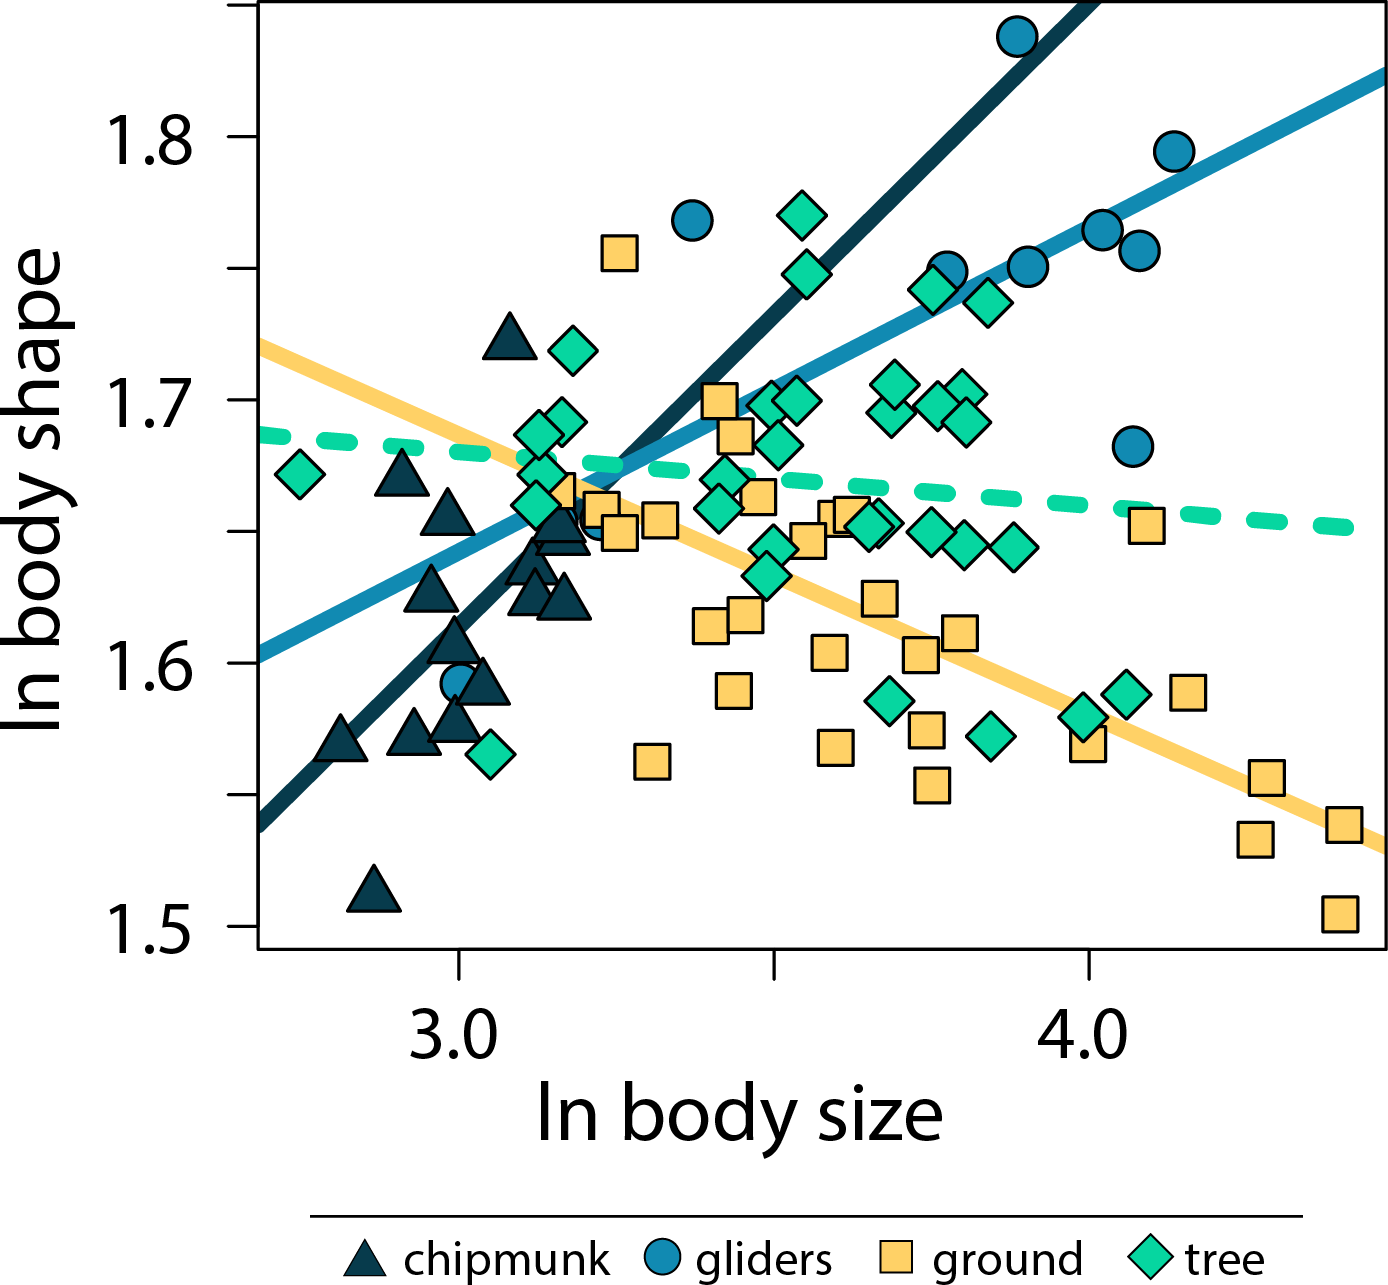 Scaling patterns of body plans differ among squirrel ecotypes [PeerJ]